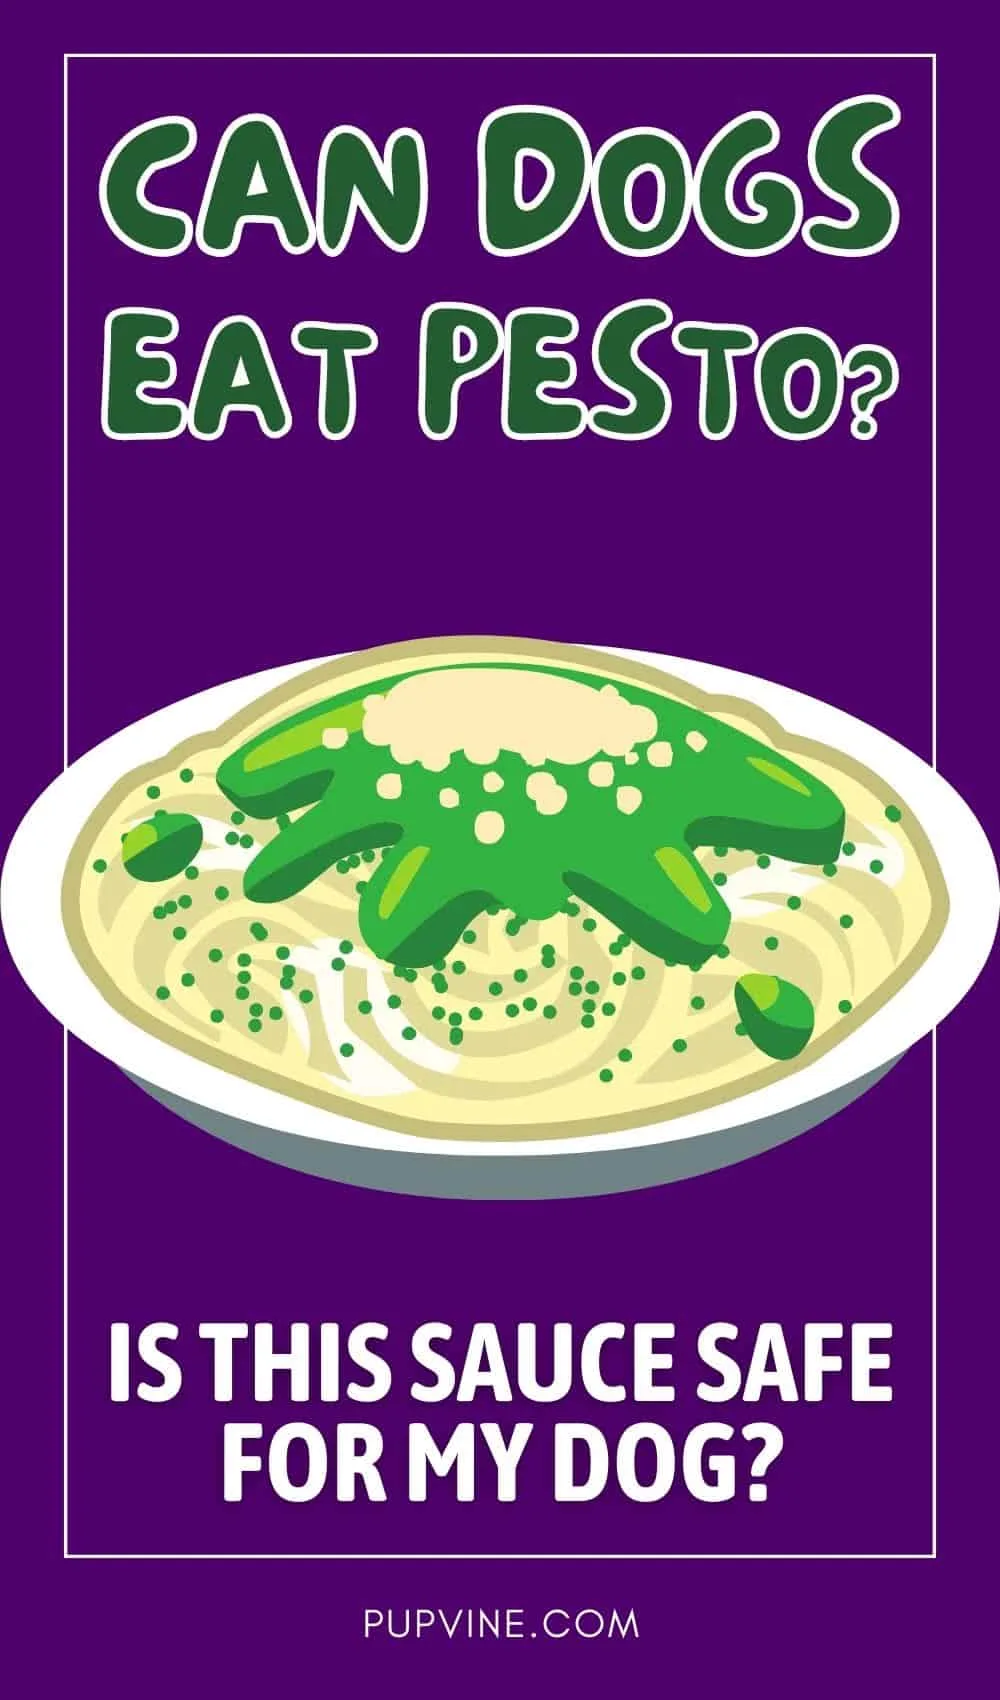 Can Dogs Eat Pesto? Is This Sauce Safe For My Dog?